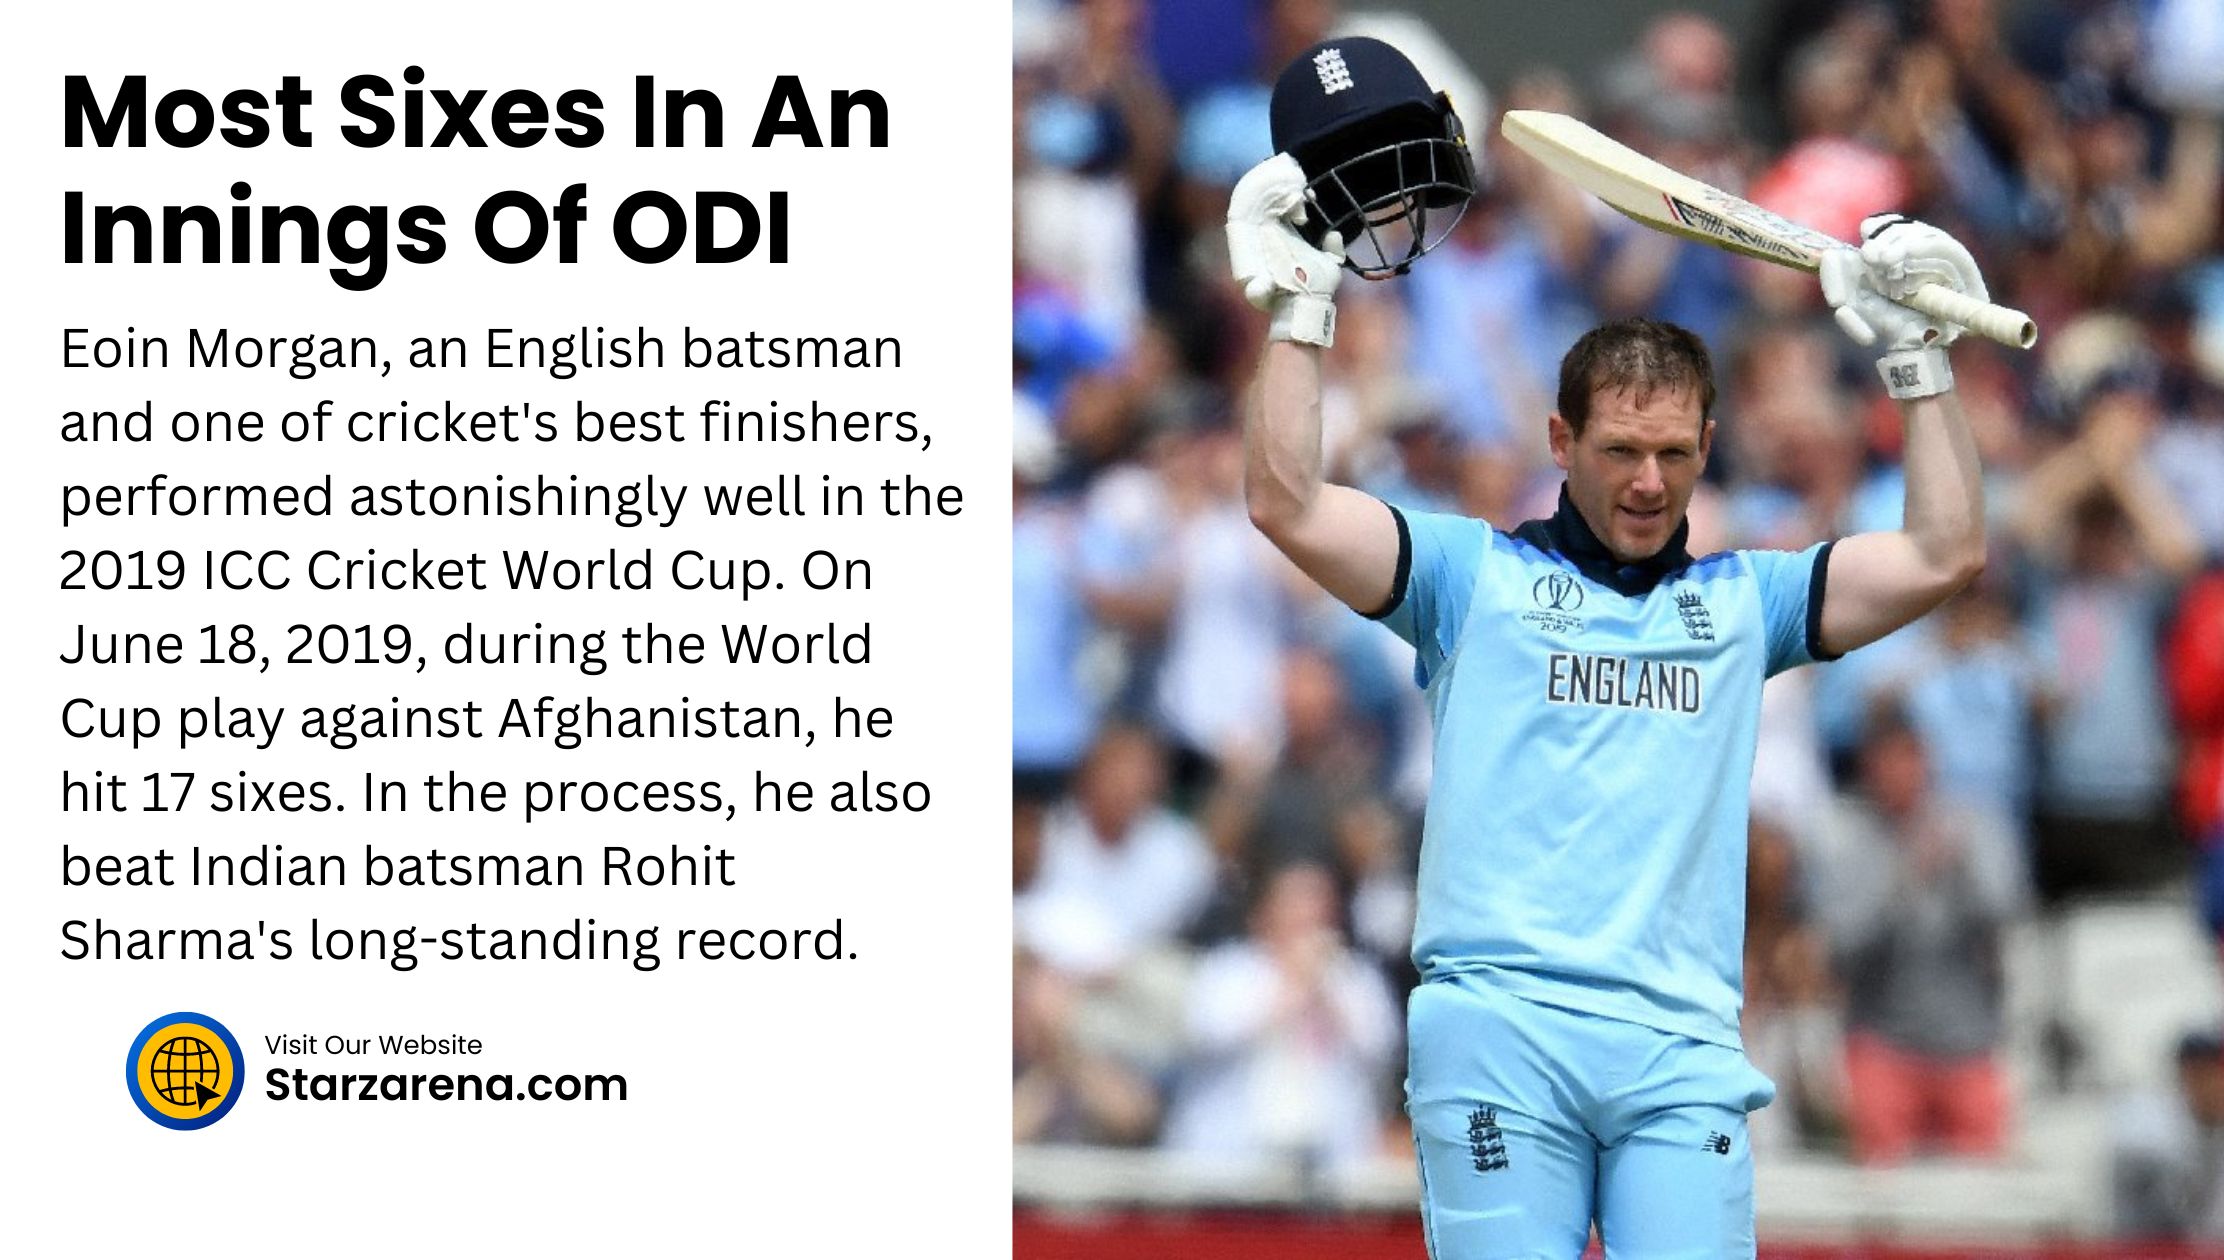 Most Sixes In An Innings Of ODI